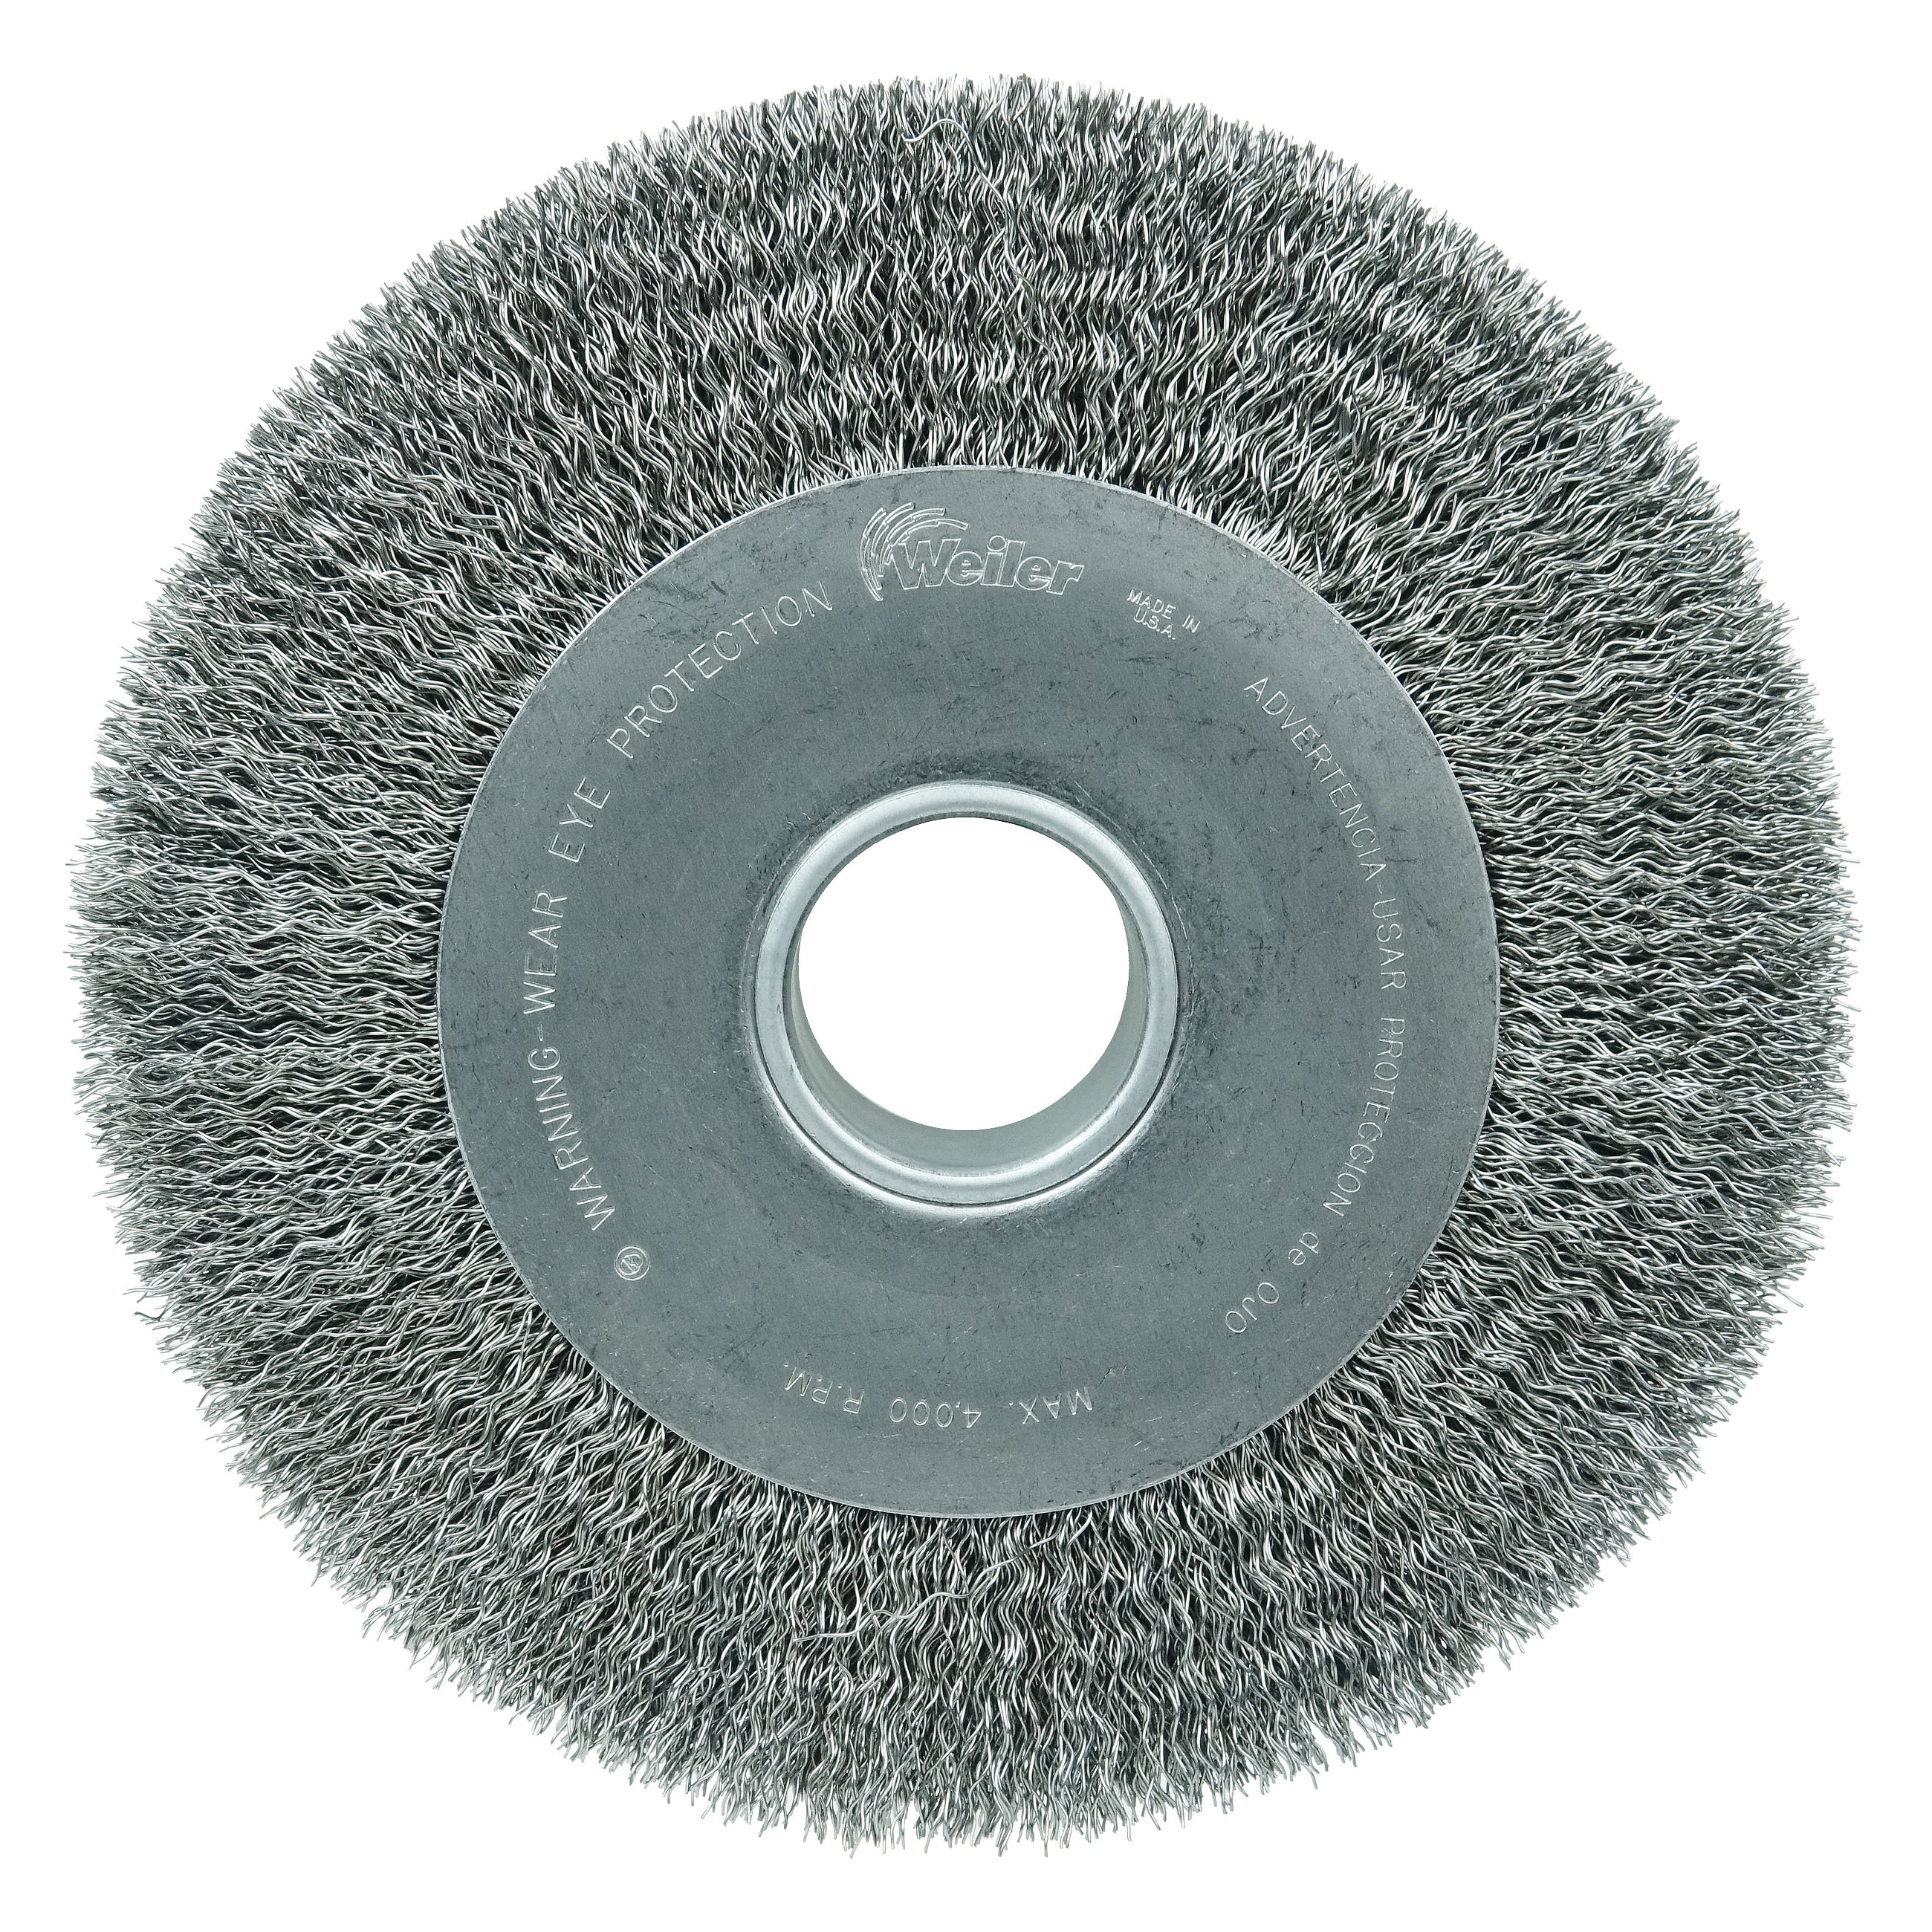 Anderson Products 03063 DM Series Narrow Face Wheel Brush, 4 in Dia Brush, 3/8 in W Face, 0.006 in Dia Crimped Filament/Wire, 1/2 to 3/8 in Arbor Hole